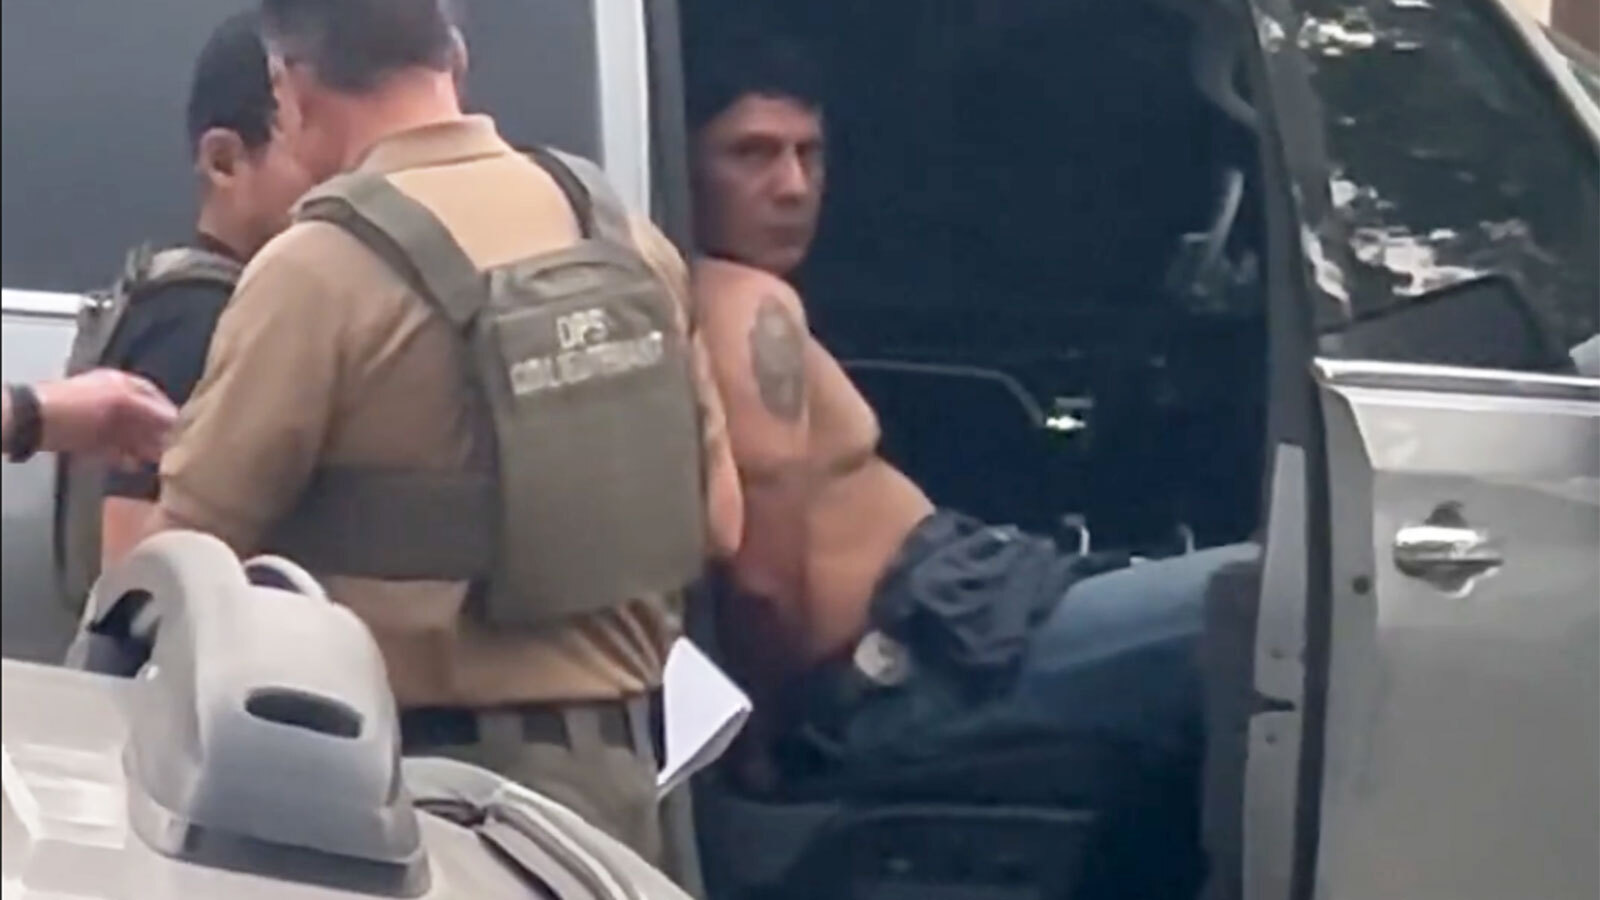 Francisco Oropesa sits in a law enforcement vehicle after being taken into custody Tuesday evening in this screengrab from video taken by a witness.